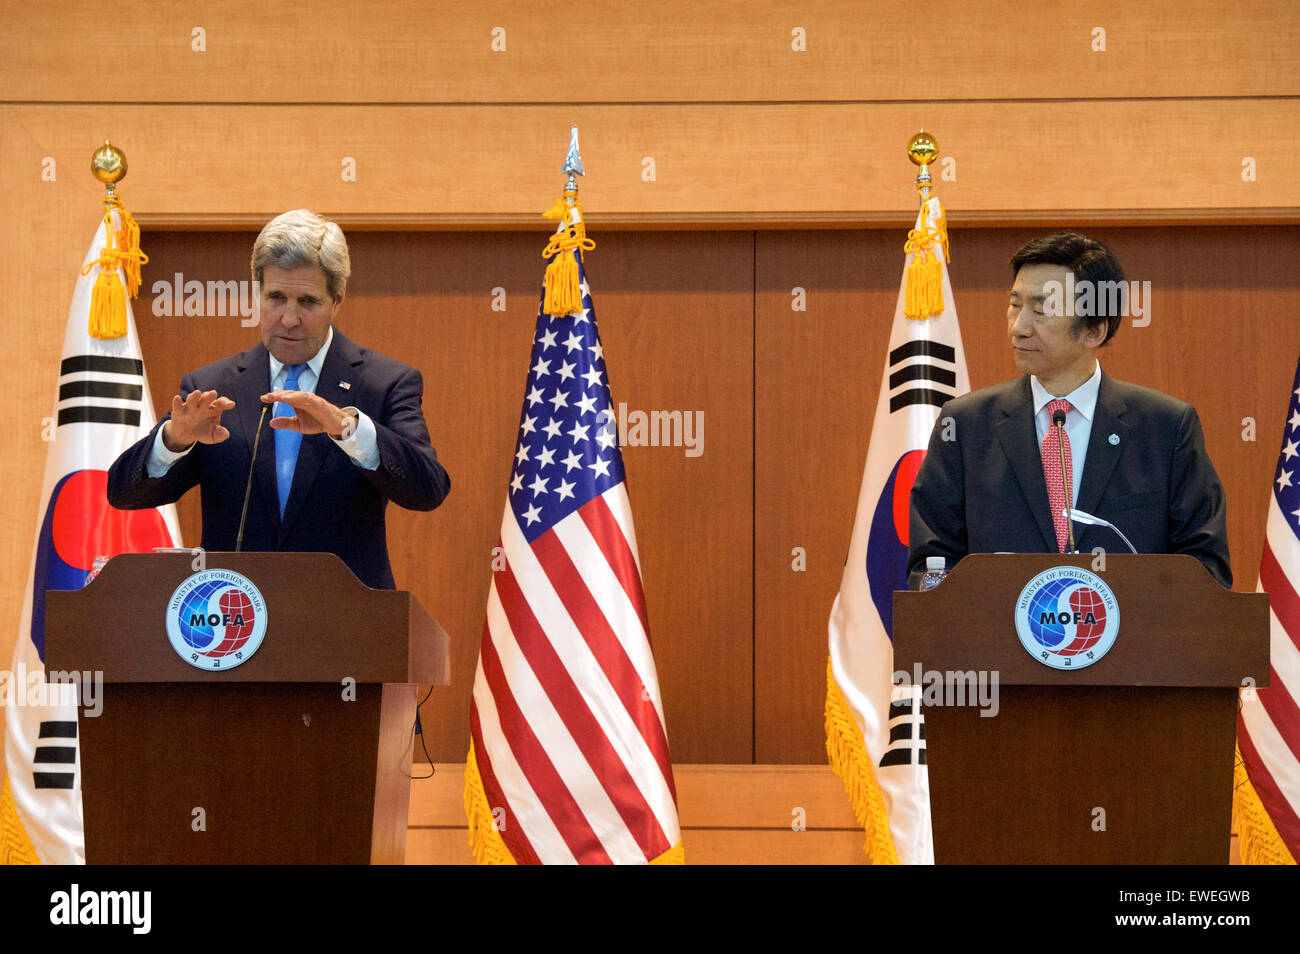 U.S. Secretary of State John Kerry addresses reporters during a news conference after a bilateral meeting with Republic of Korea Foreign Minister Yun Byung-se on May 18, 2015, at the Ministry of Foreign Affairs in Seoul, South Korea. Stock Photo